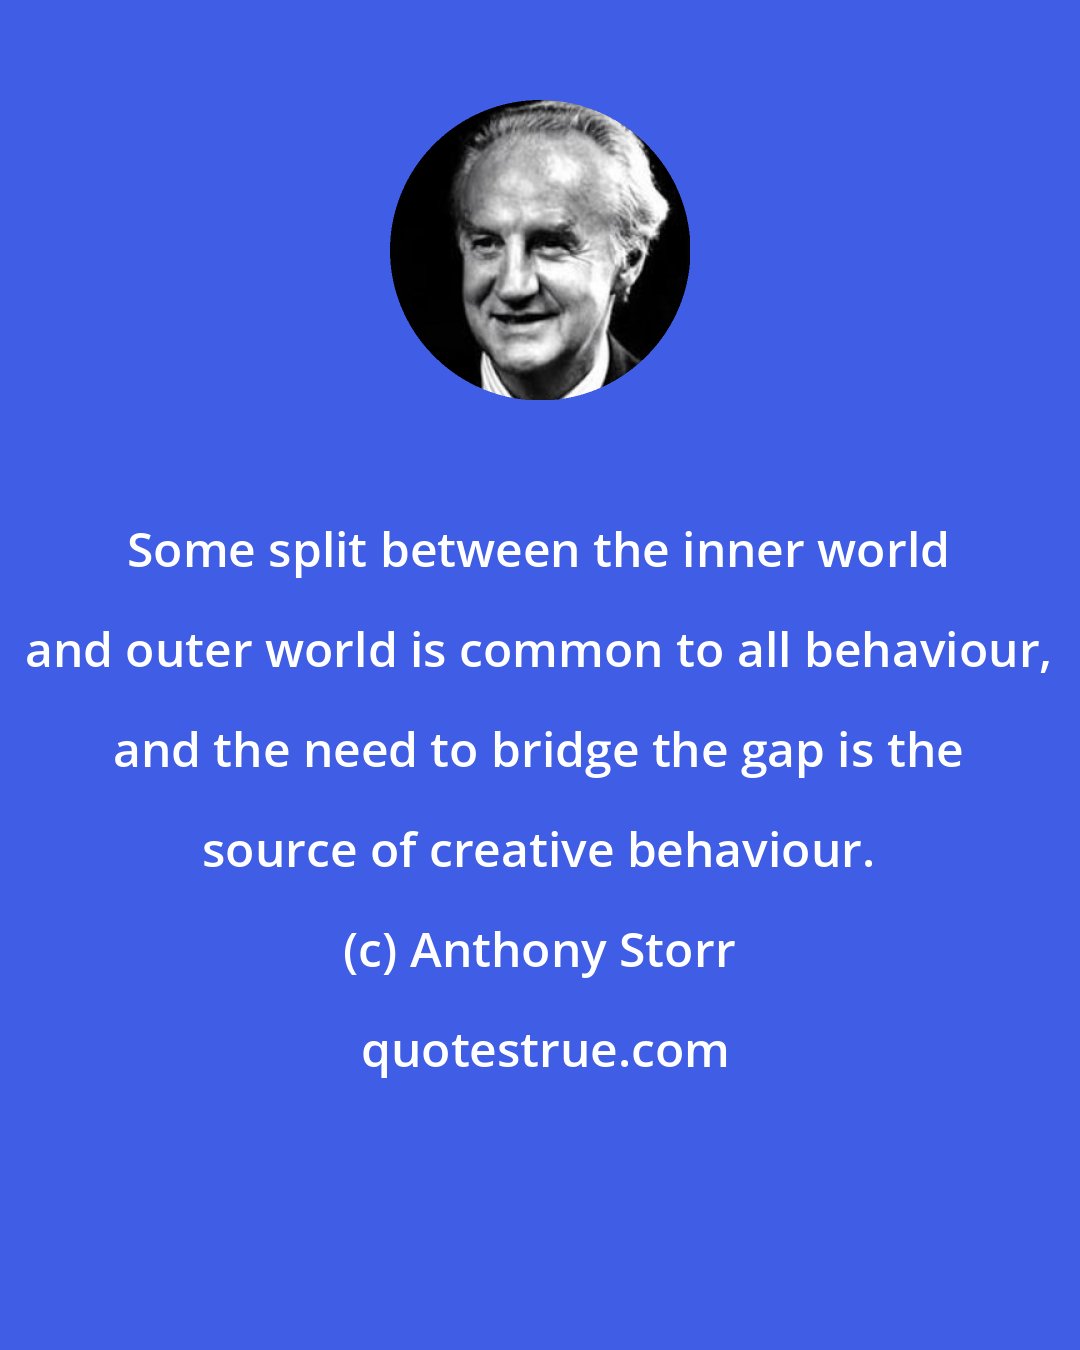 Anthony Storr: Some split between the inner world and outer world is common to all behaviour, and the need to bridge the gap is the source of creative behaviour.